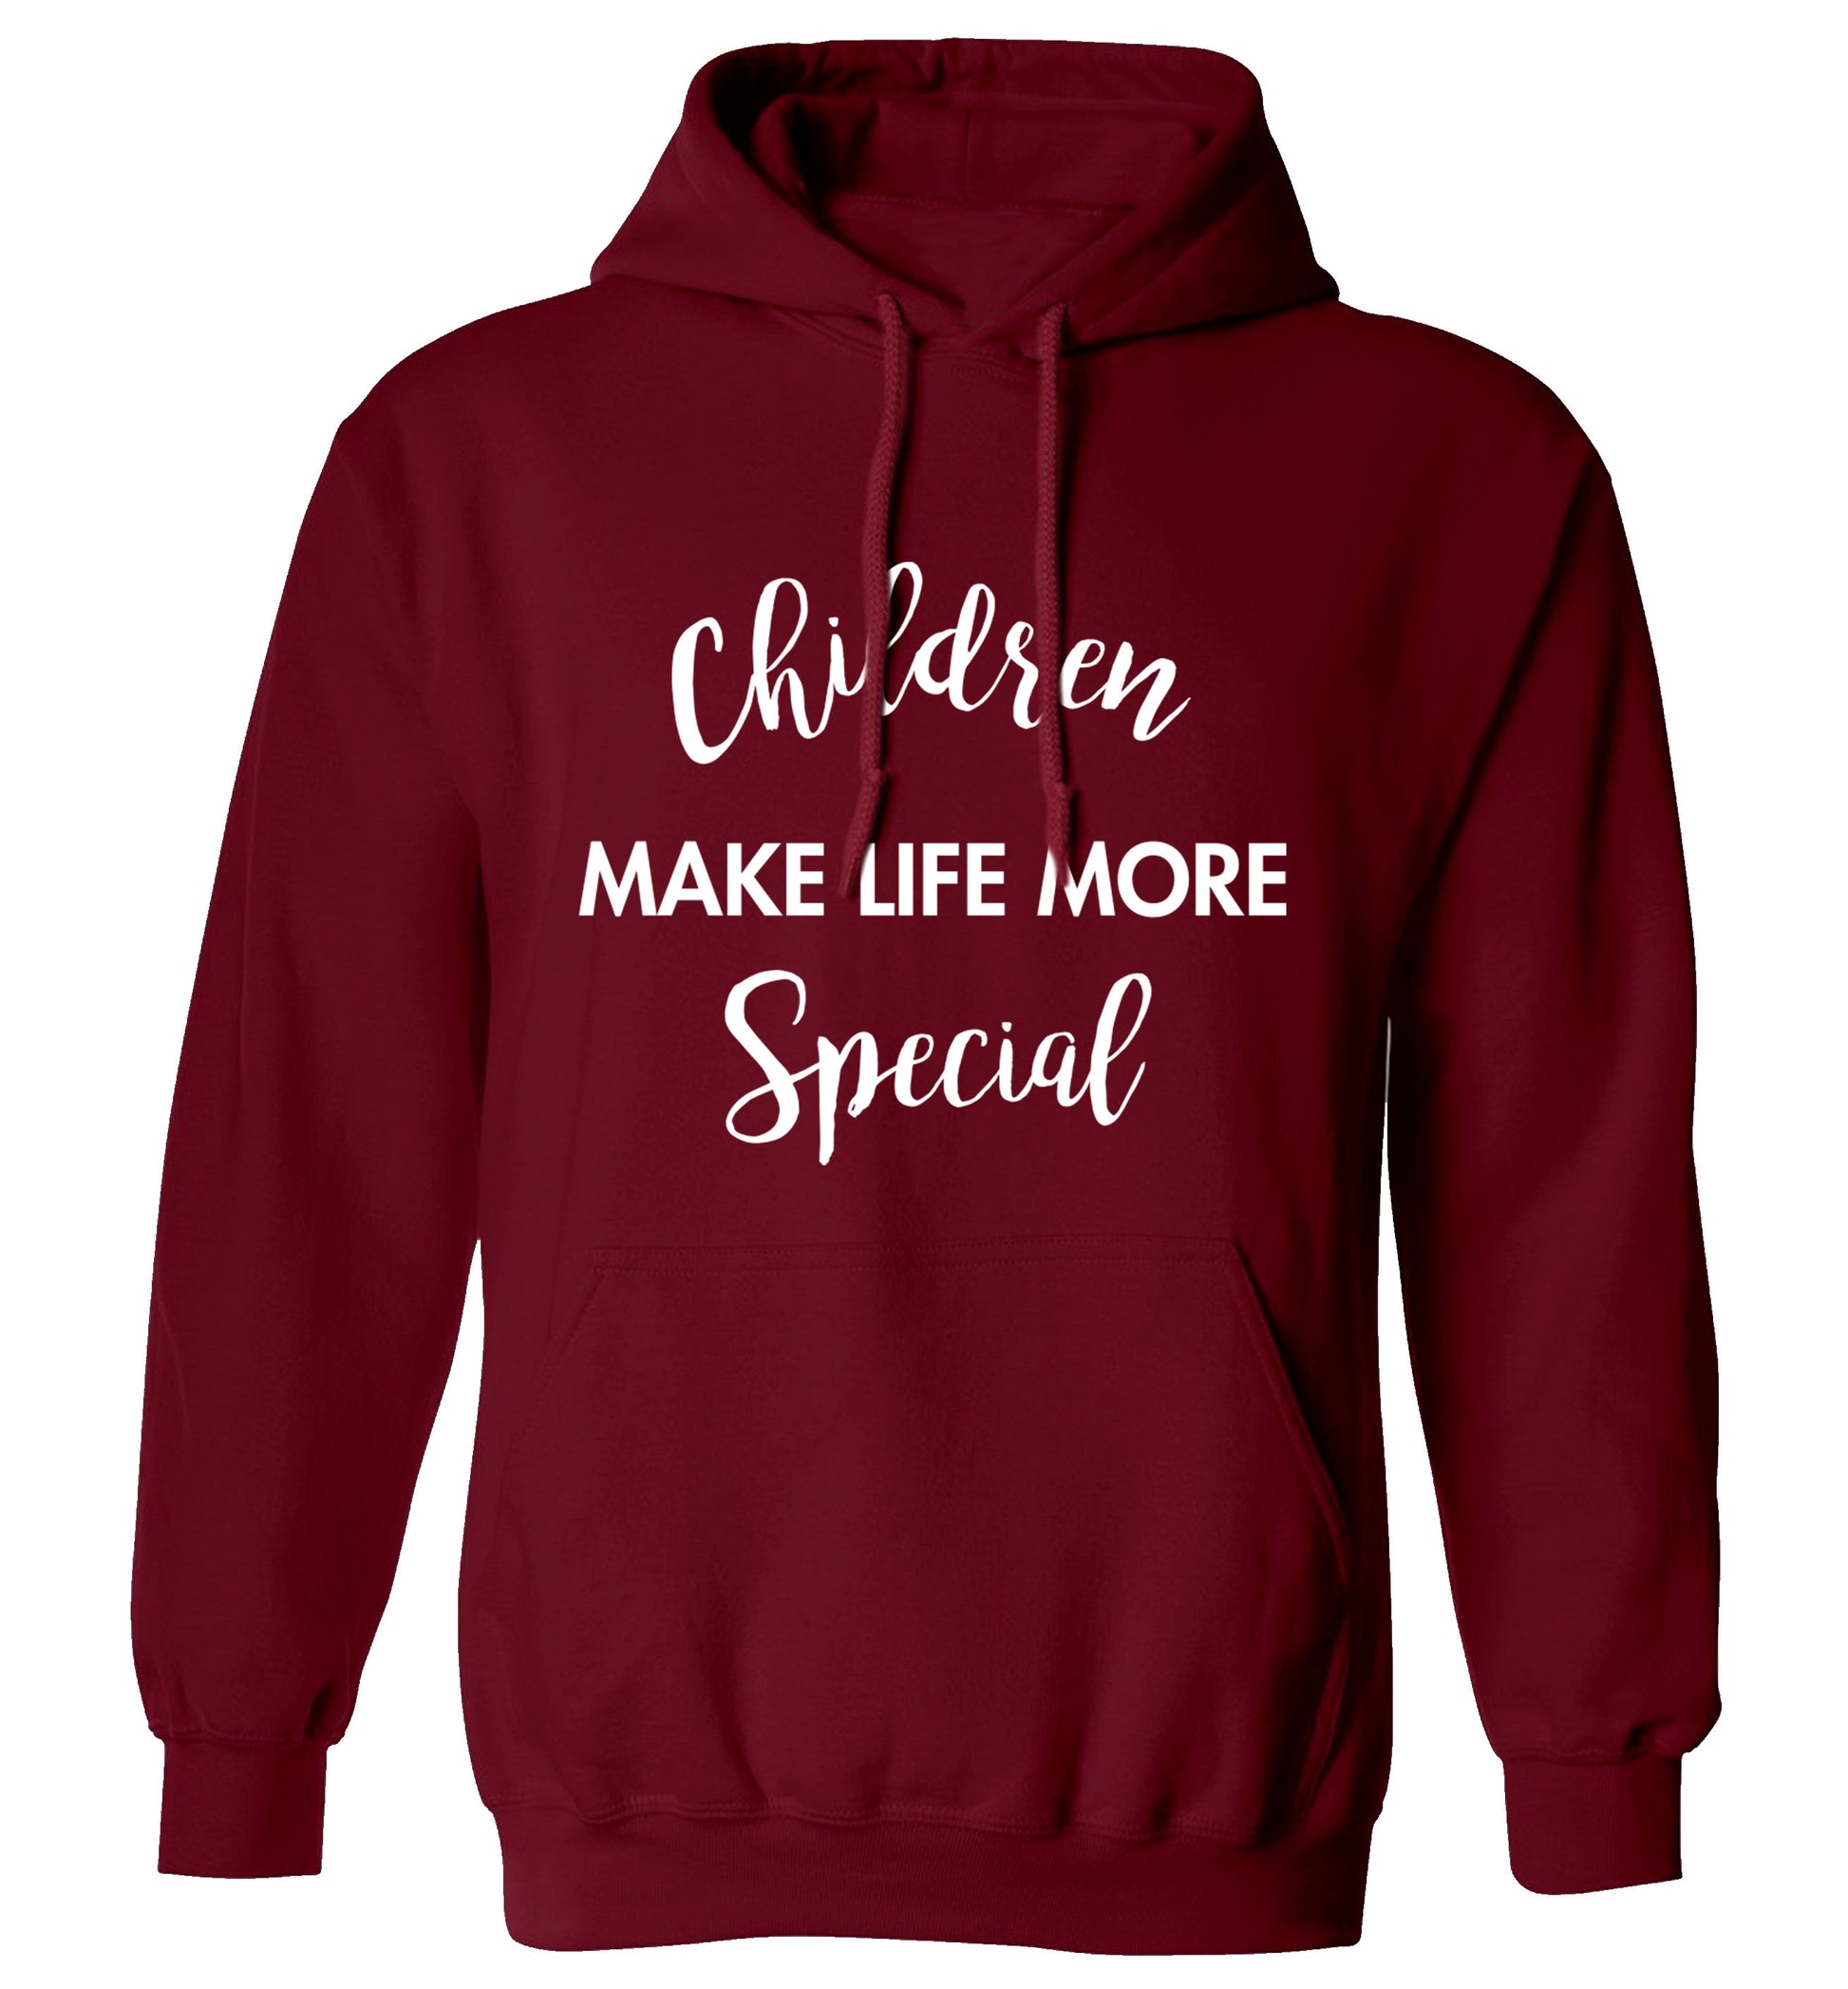 Children make life more special adults unisex maroon hoodie 2XL